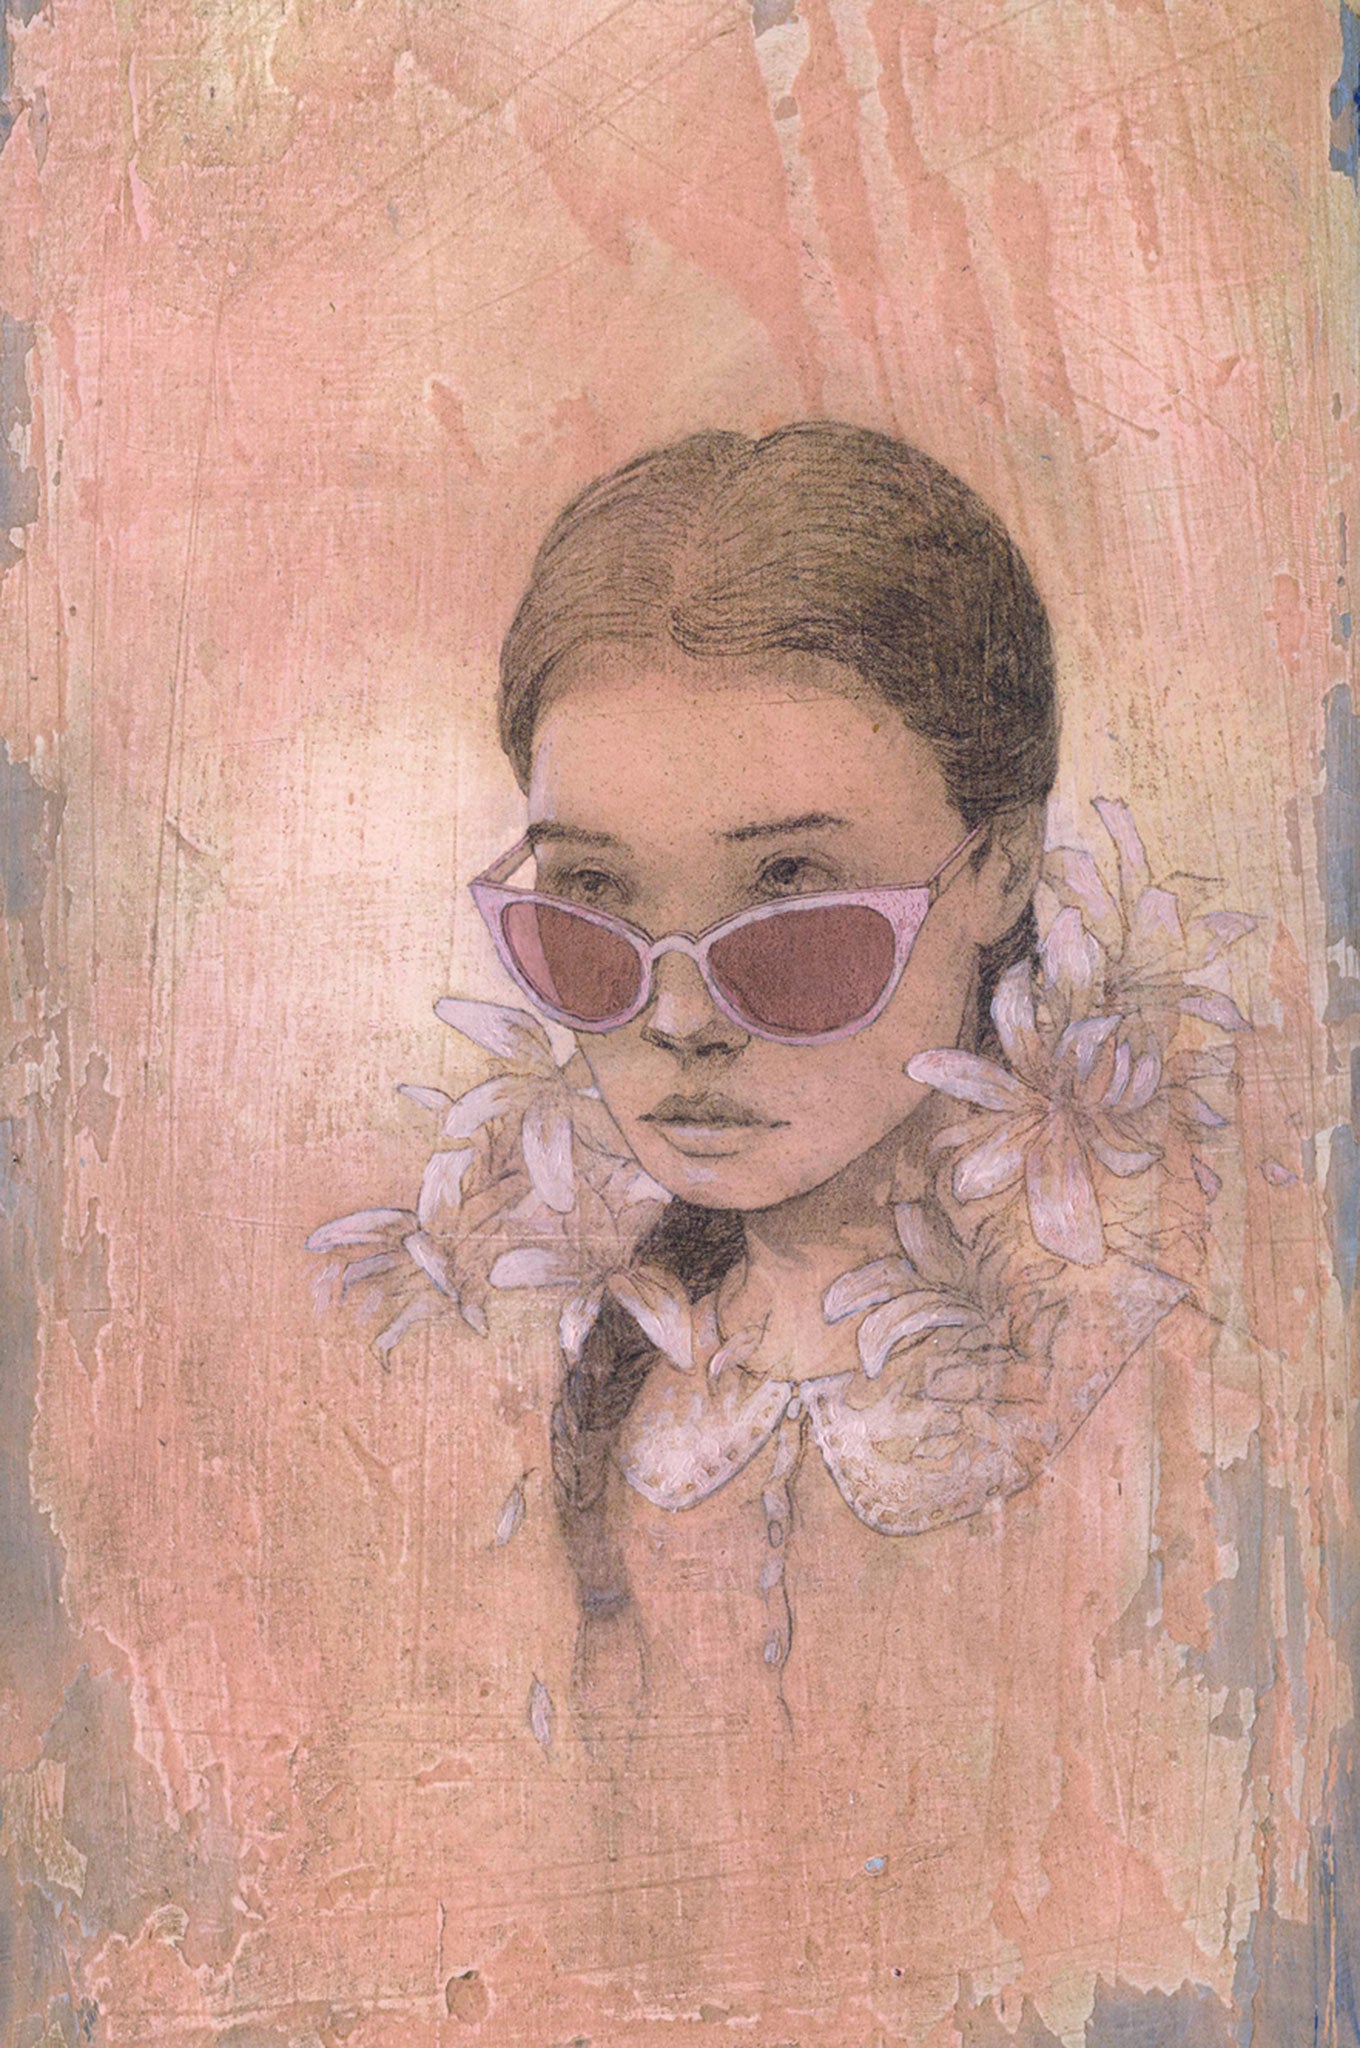 Illustration by Federico Infante from The Folio Society edition of Lolita © FedericoInfante 2015